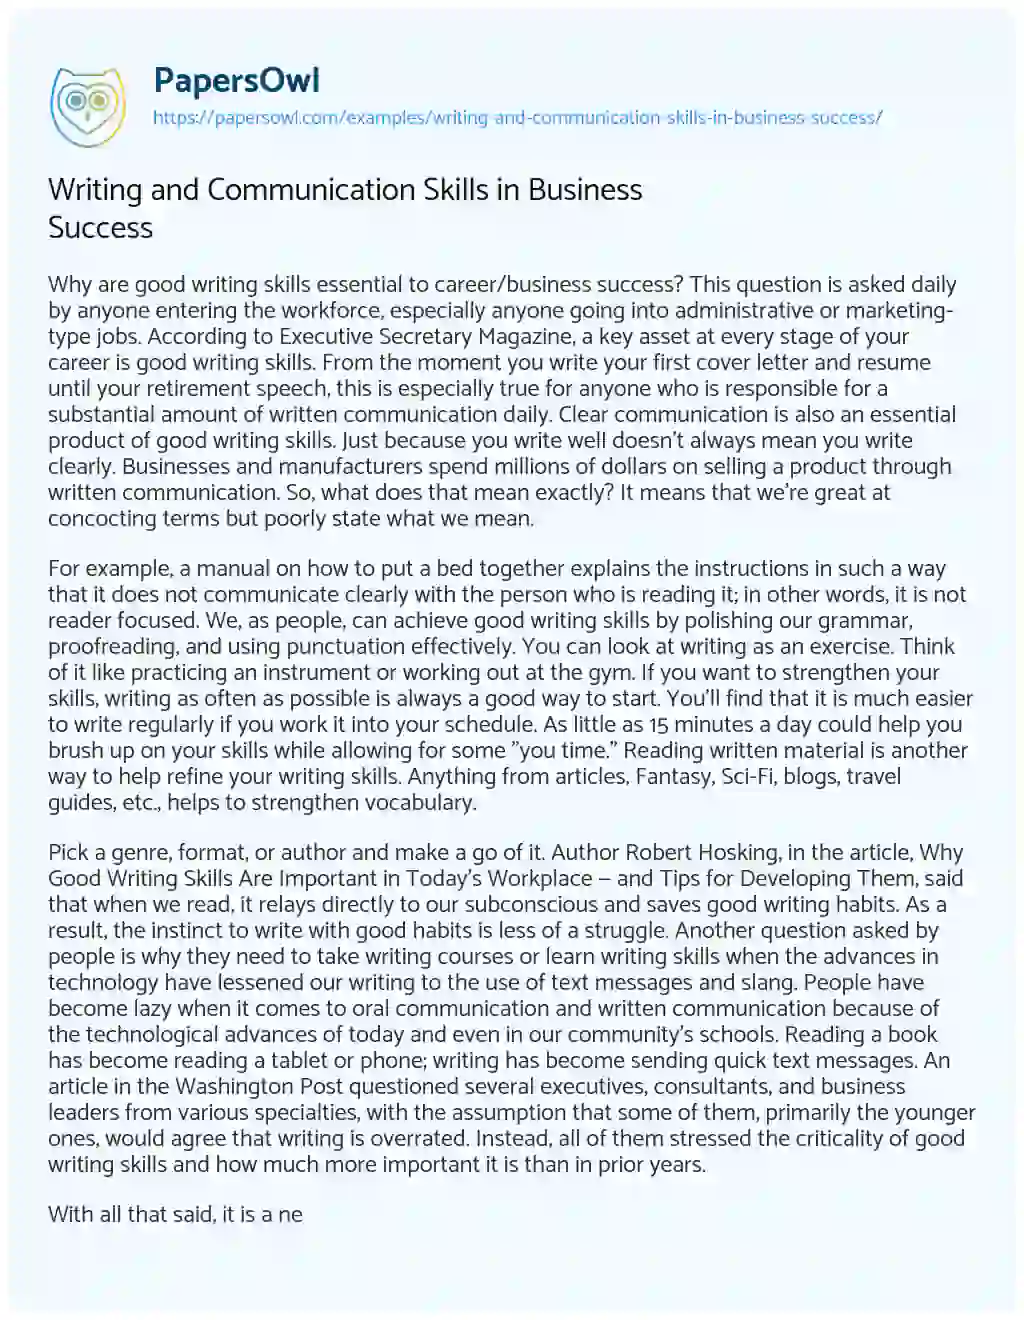 Essay on Writing and Communication Skills in Business Success